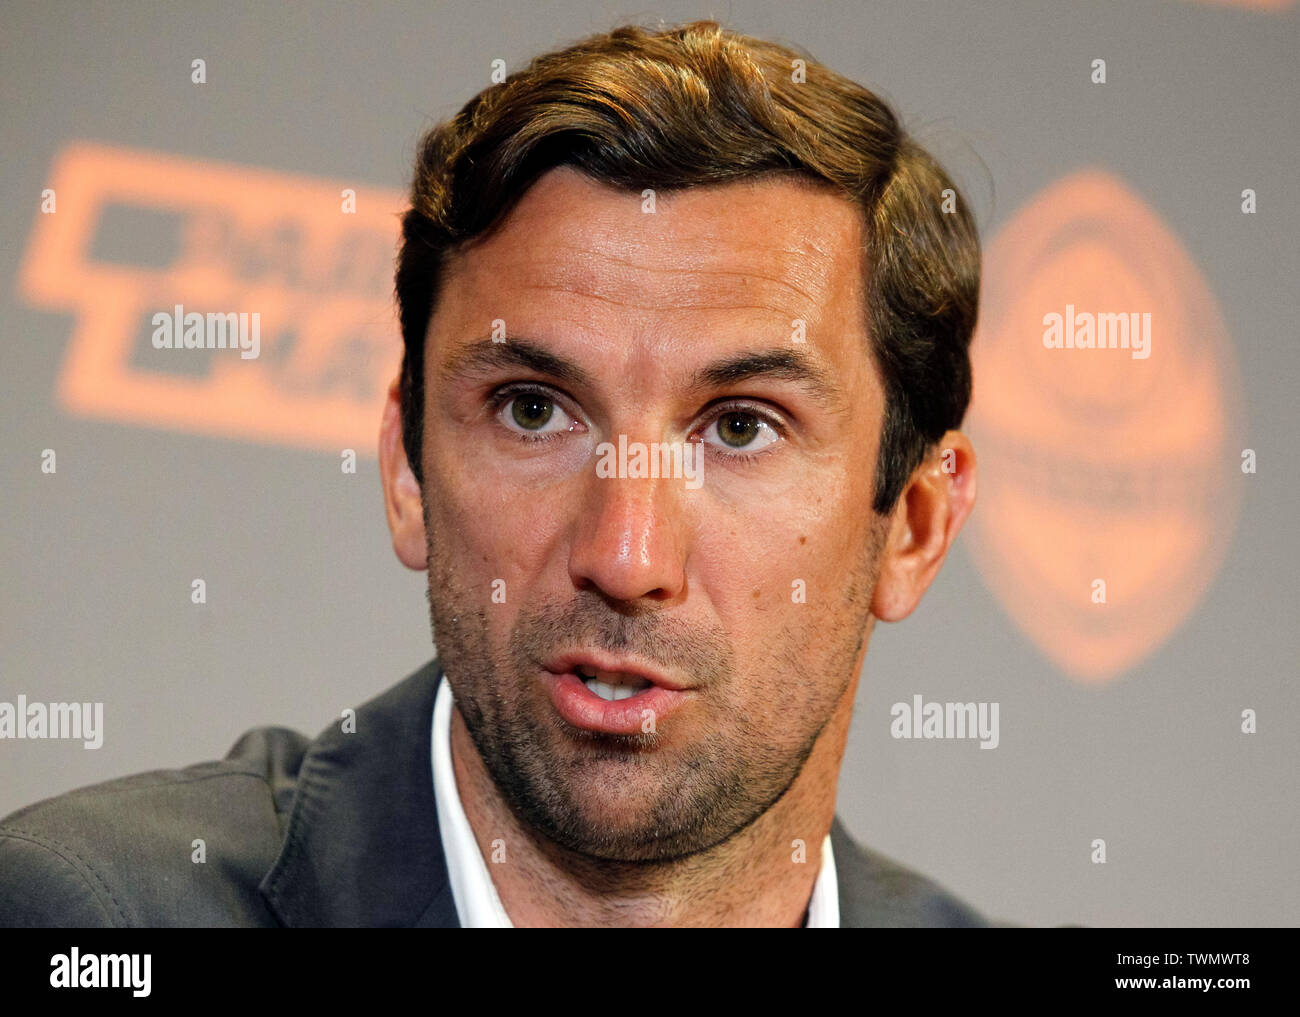 The former captain of Shakhtar Donetsk and Croatia national team Darijo Srna speaks during his first press conference as an assistant manager for Shakhtar Donetsk FC in Kiev. Stock Photo